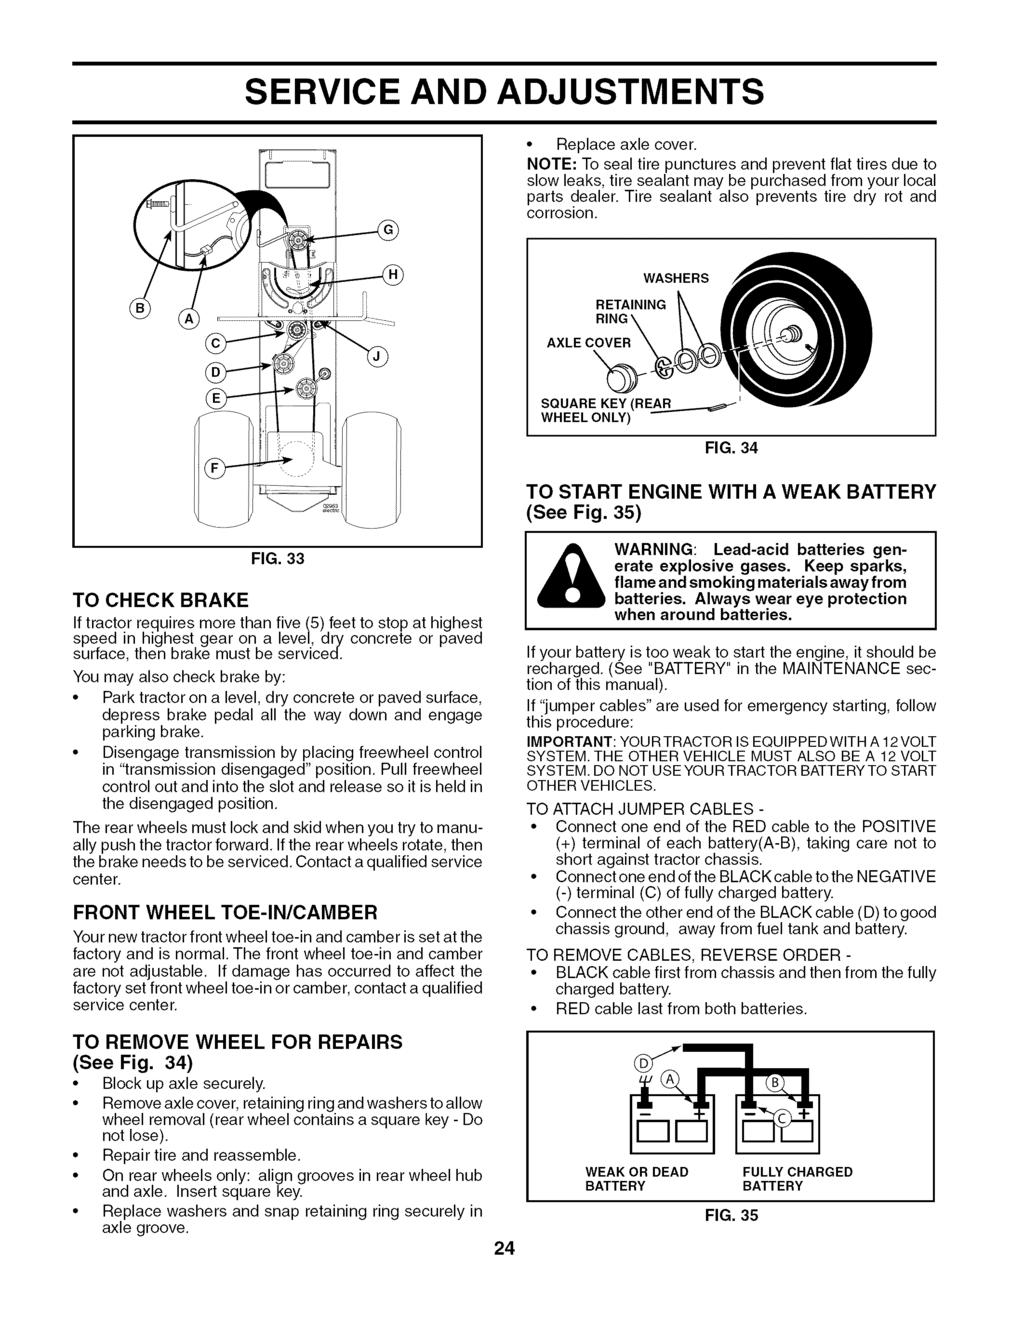 SERVICE AND ADJUSTMENTS Replace axle cover. NOTE: To seal tire punctures and prevent flat tires due to slow leaks, tire sealant may be purchased from your local parts dealer.